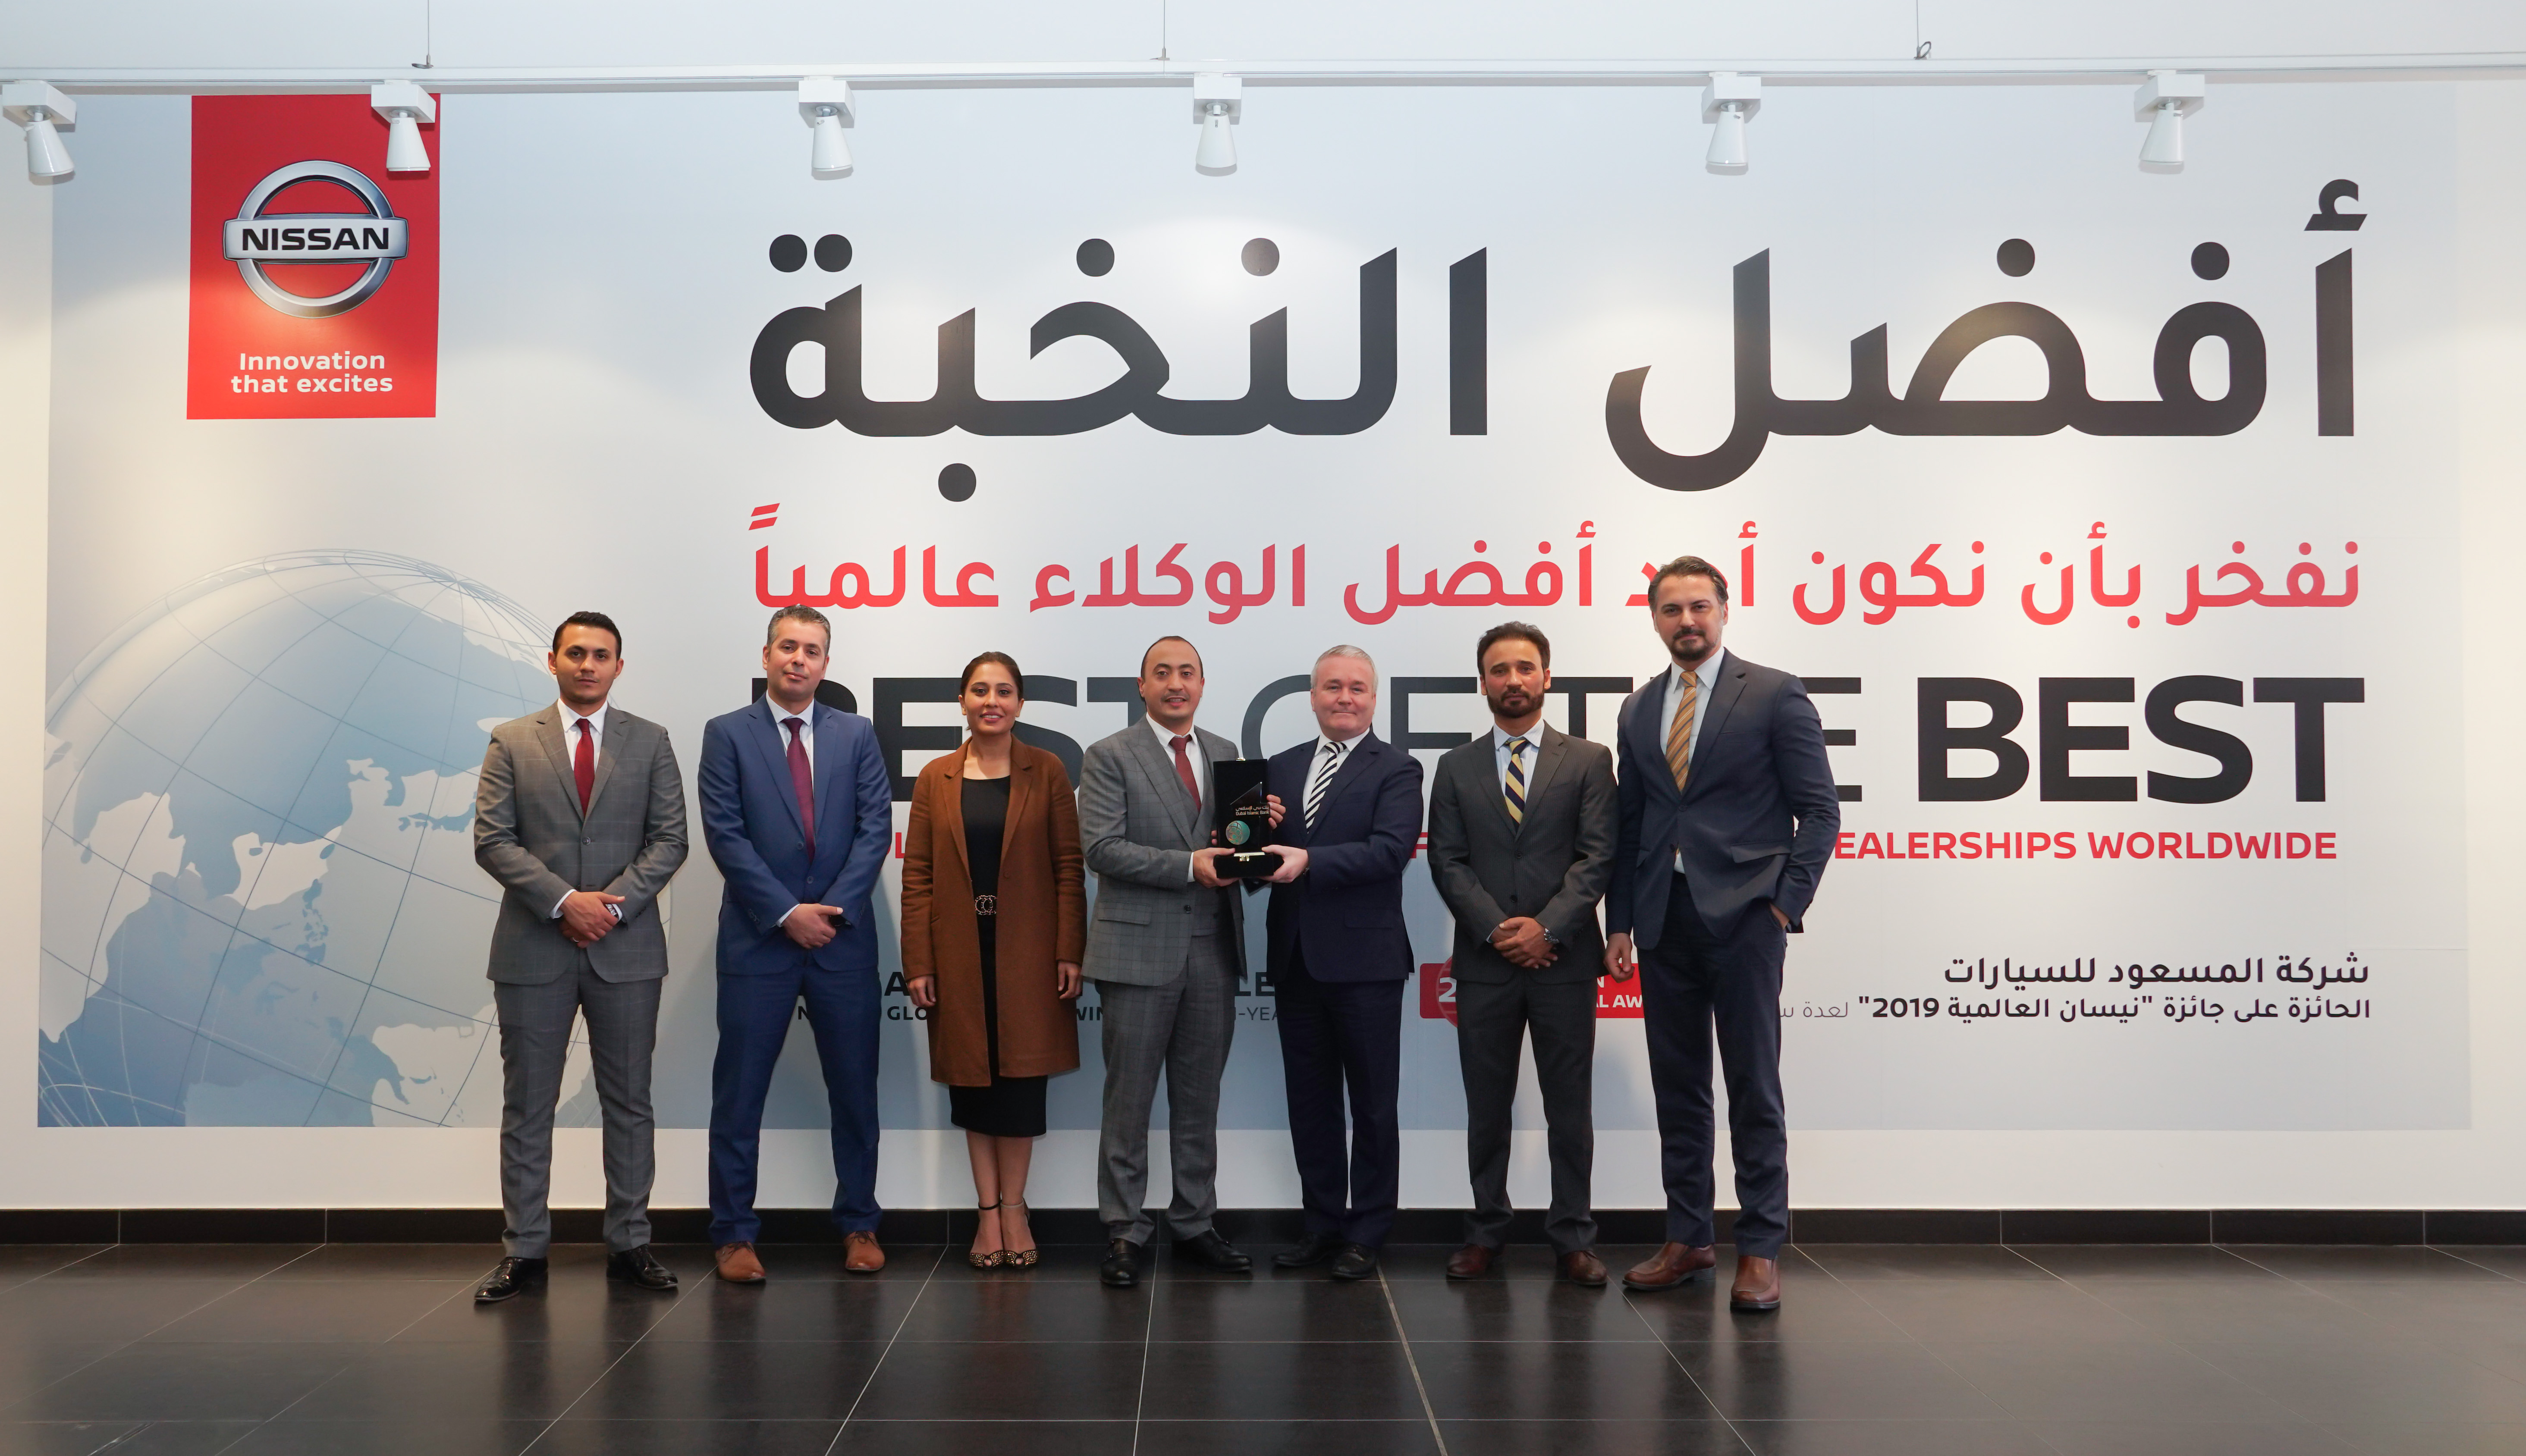 Al Masaood Automobiles First Ever Car Dealer to be recognized by Dubai Islamic Bank